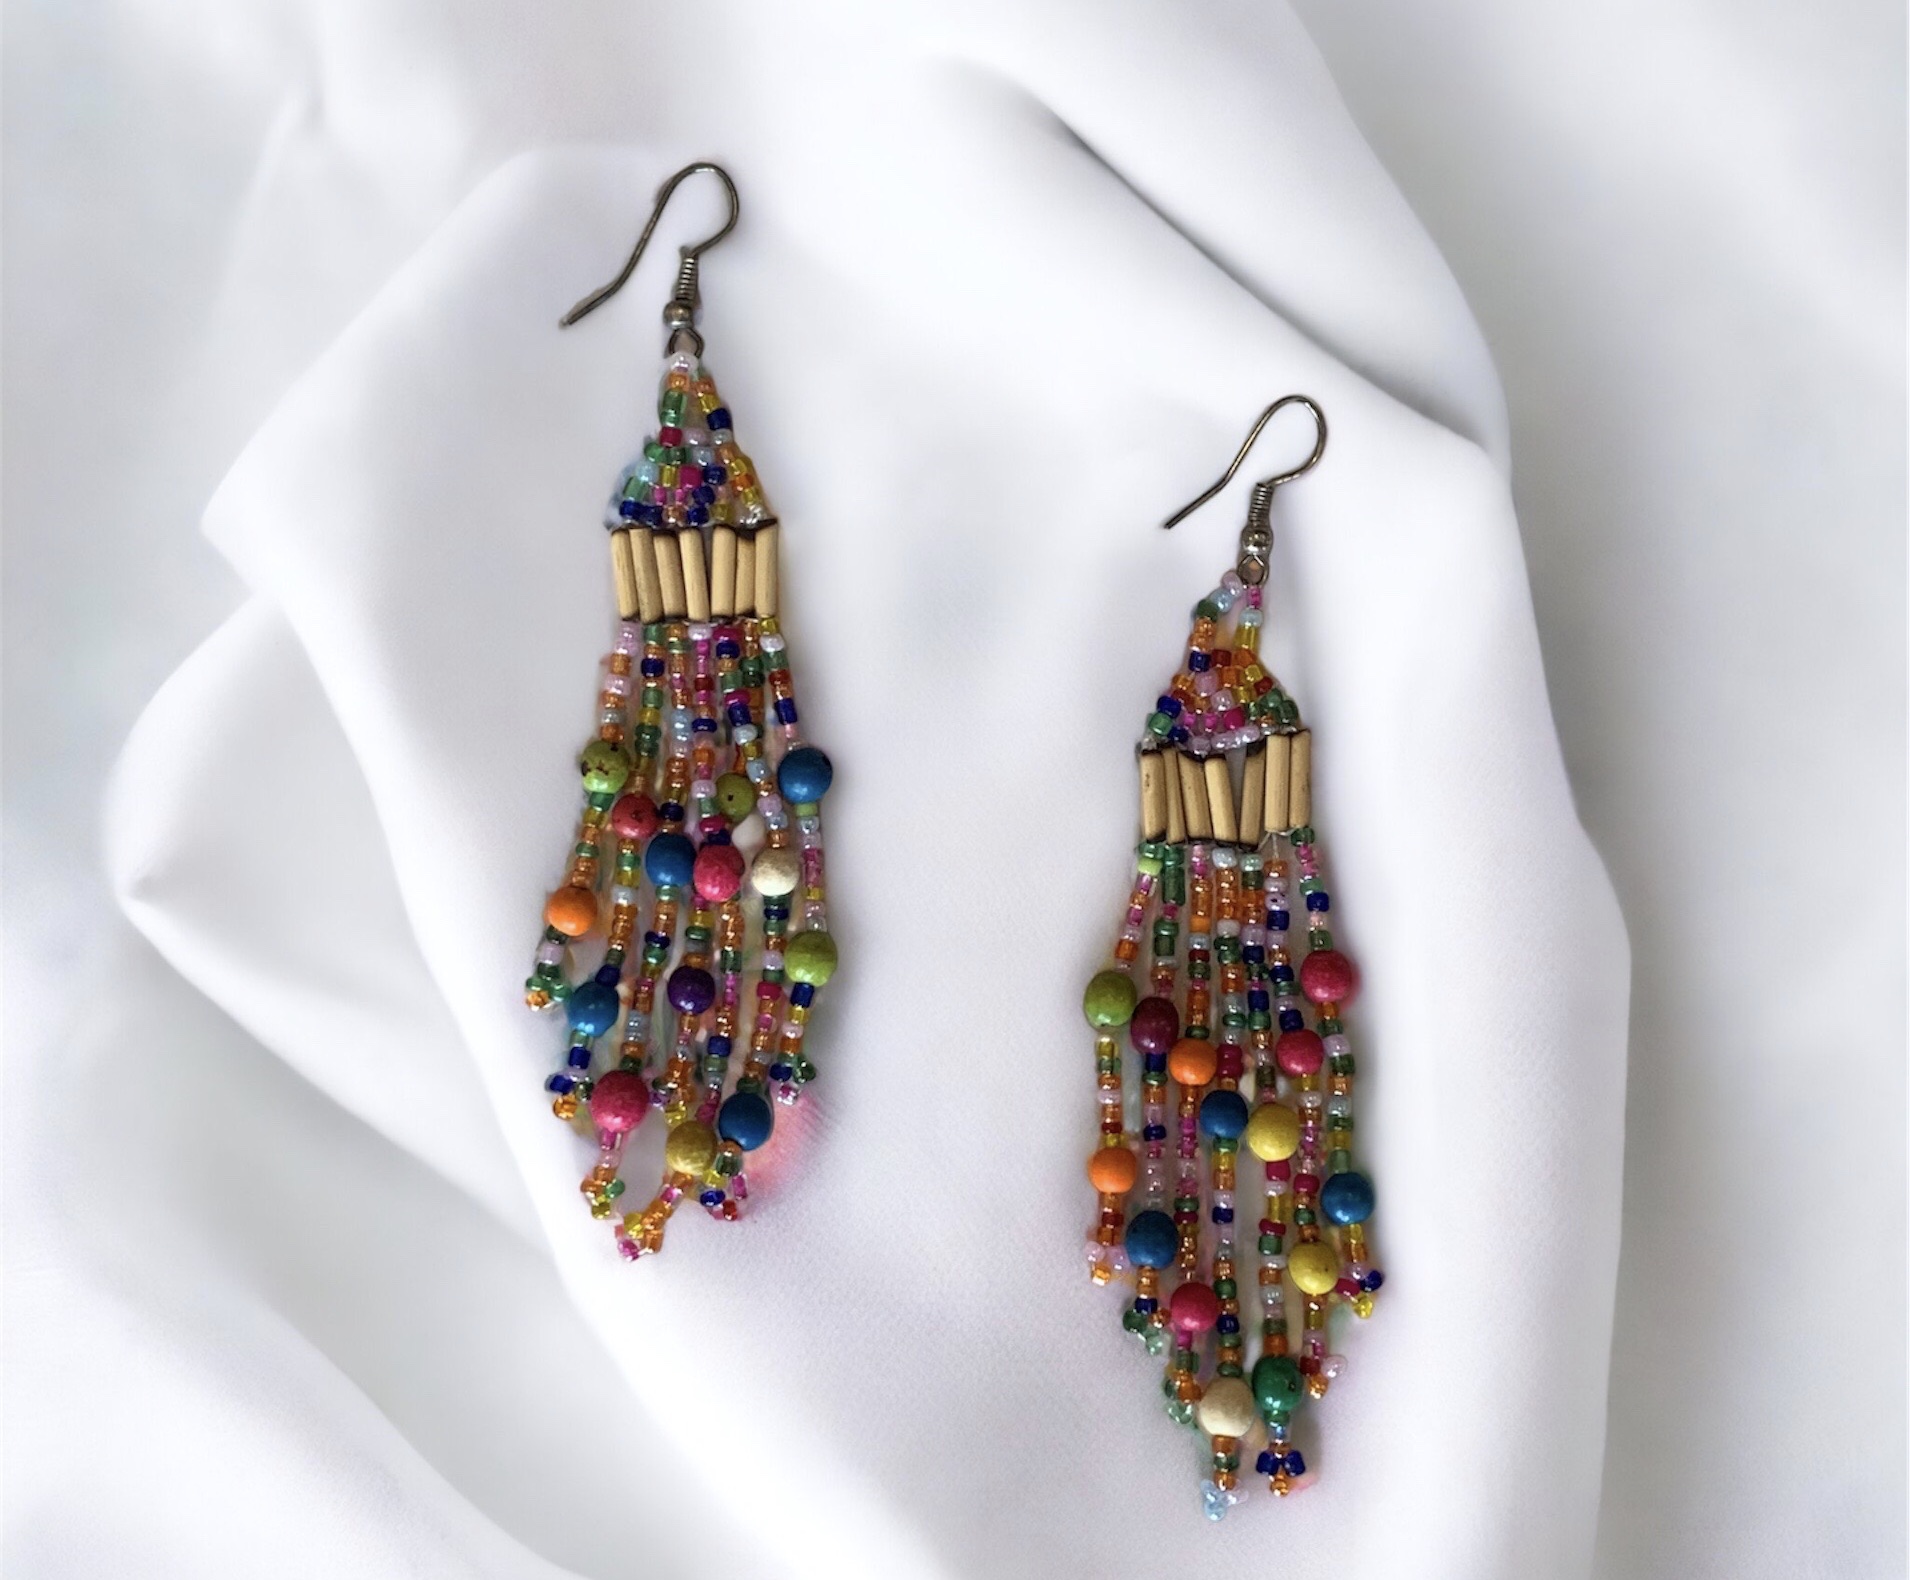 These beautiful earrings measure 4 inches long!